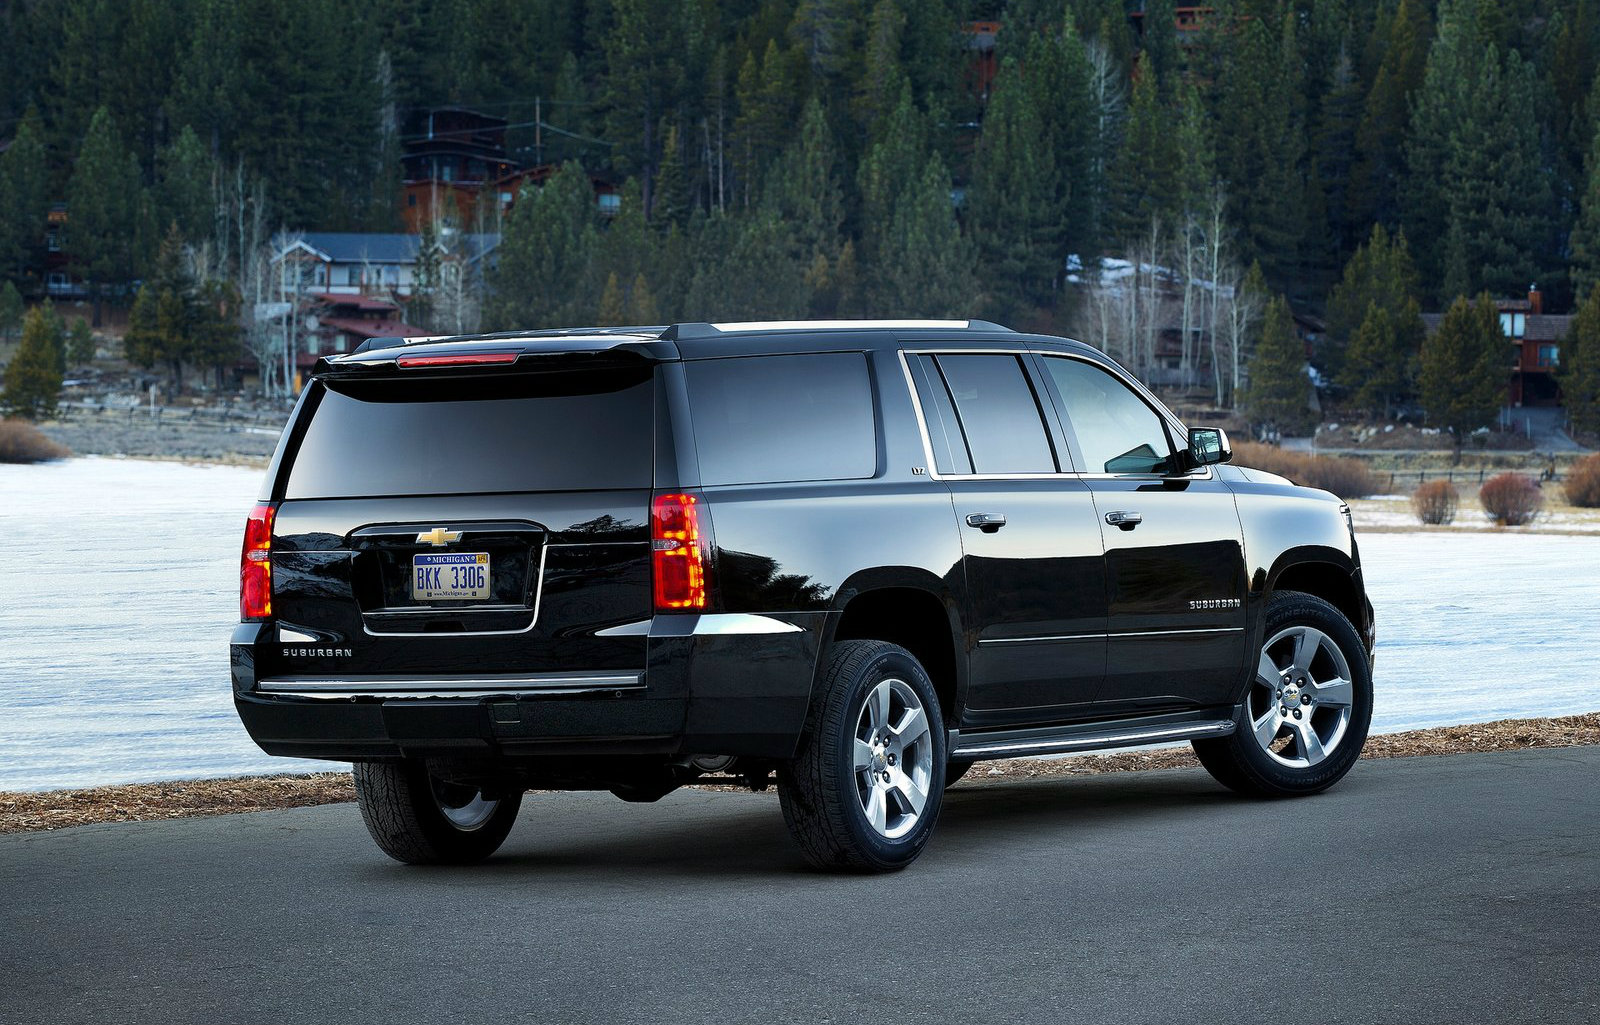 gm-full-size-suvs-updated-for-the-2015i-model-year-photo-gallery_2